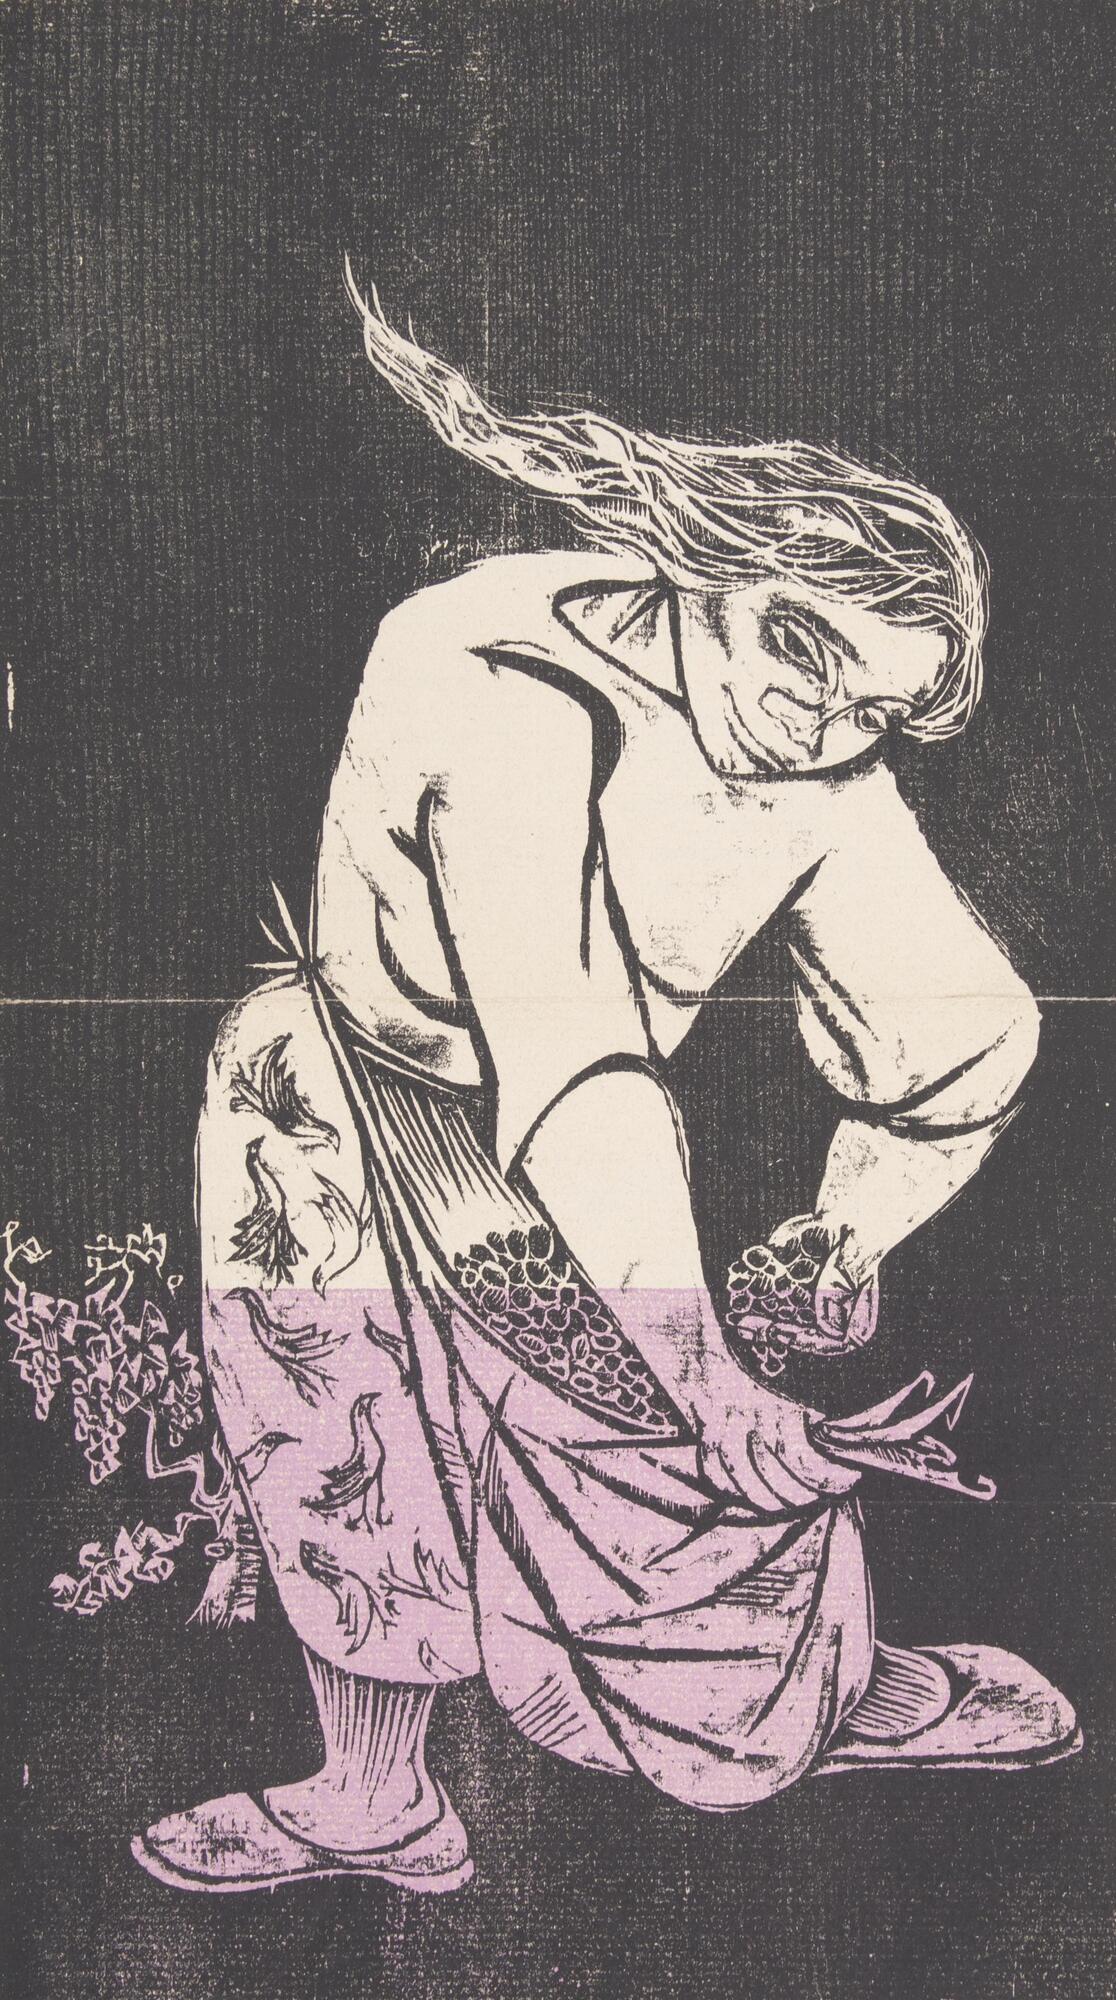 This two-color woodcut in black and pale pink depicts a standing female figure against a black background in vertical format. The figure is shown bending over collecting grapes in the folds of her apron. Her skirt is decorated in a bird motif and her hair is windswept. The verso of this print contains an announcement for an exhibition at Weyhe Gallery in New York in March and April of 1951.